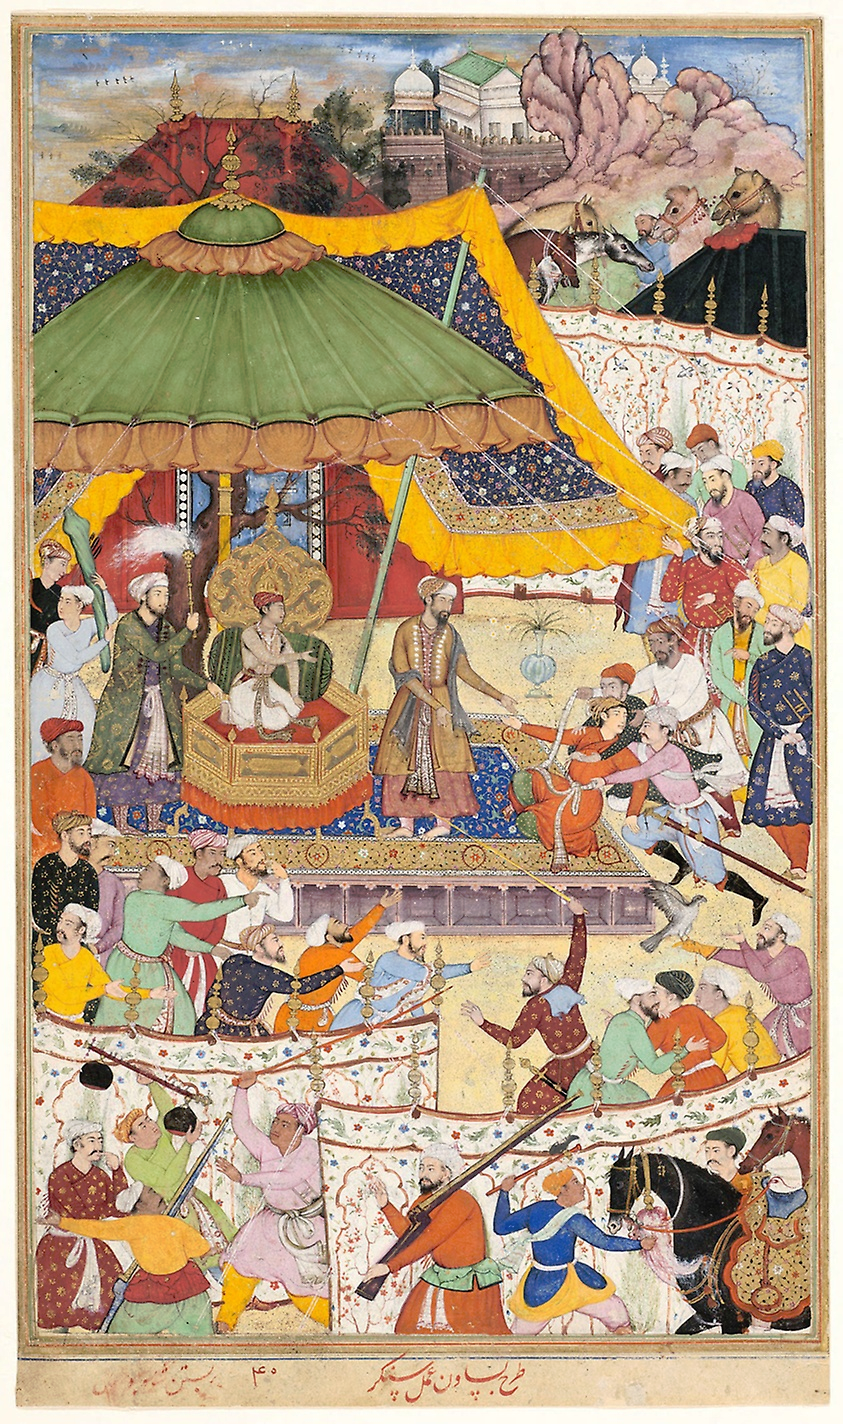 Image of The Young Emperor Akbar Arrests the Insolent Shah Abu’l-Ma’ali by Basawan and Shankar